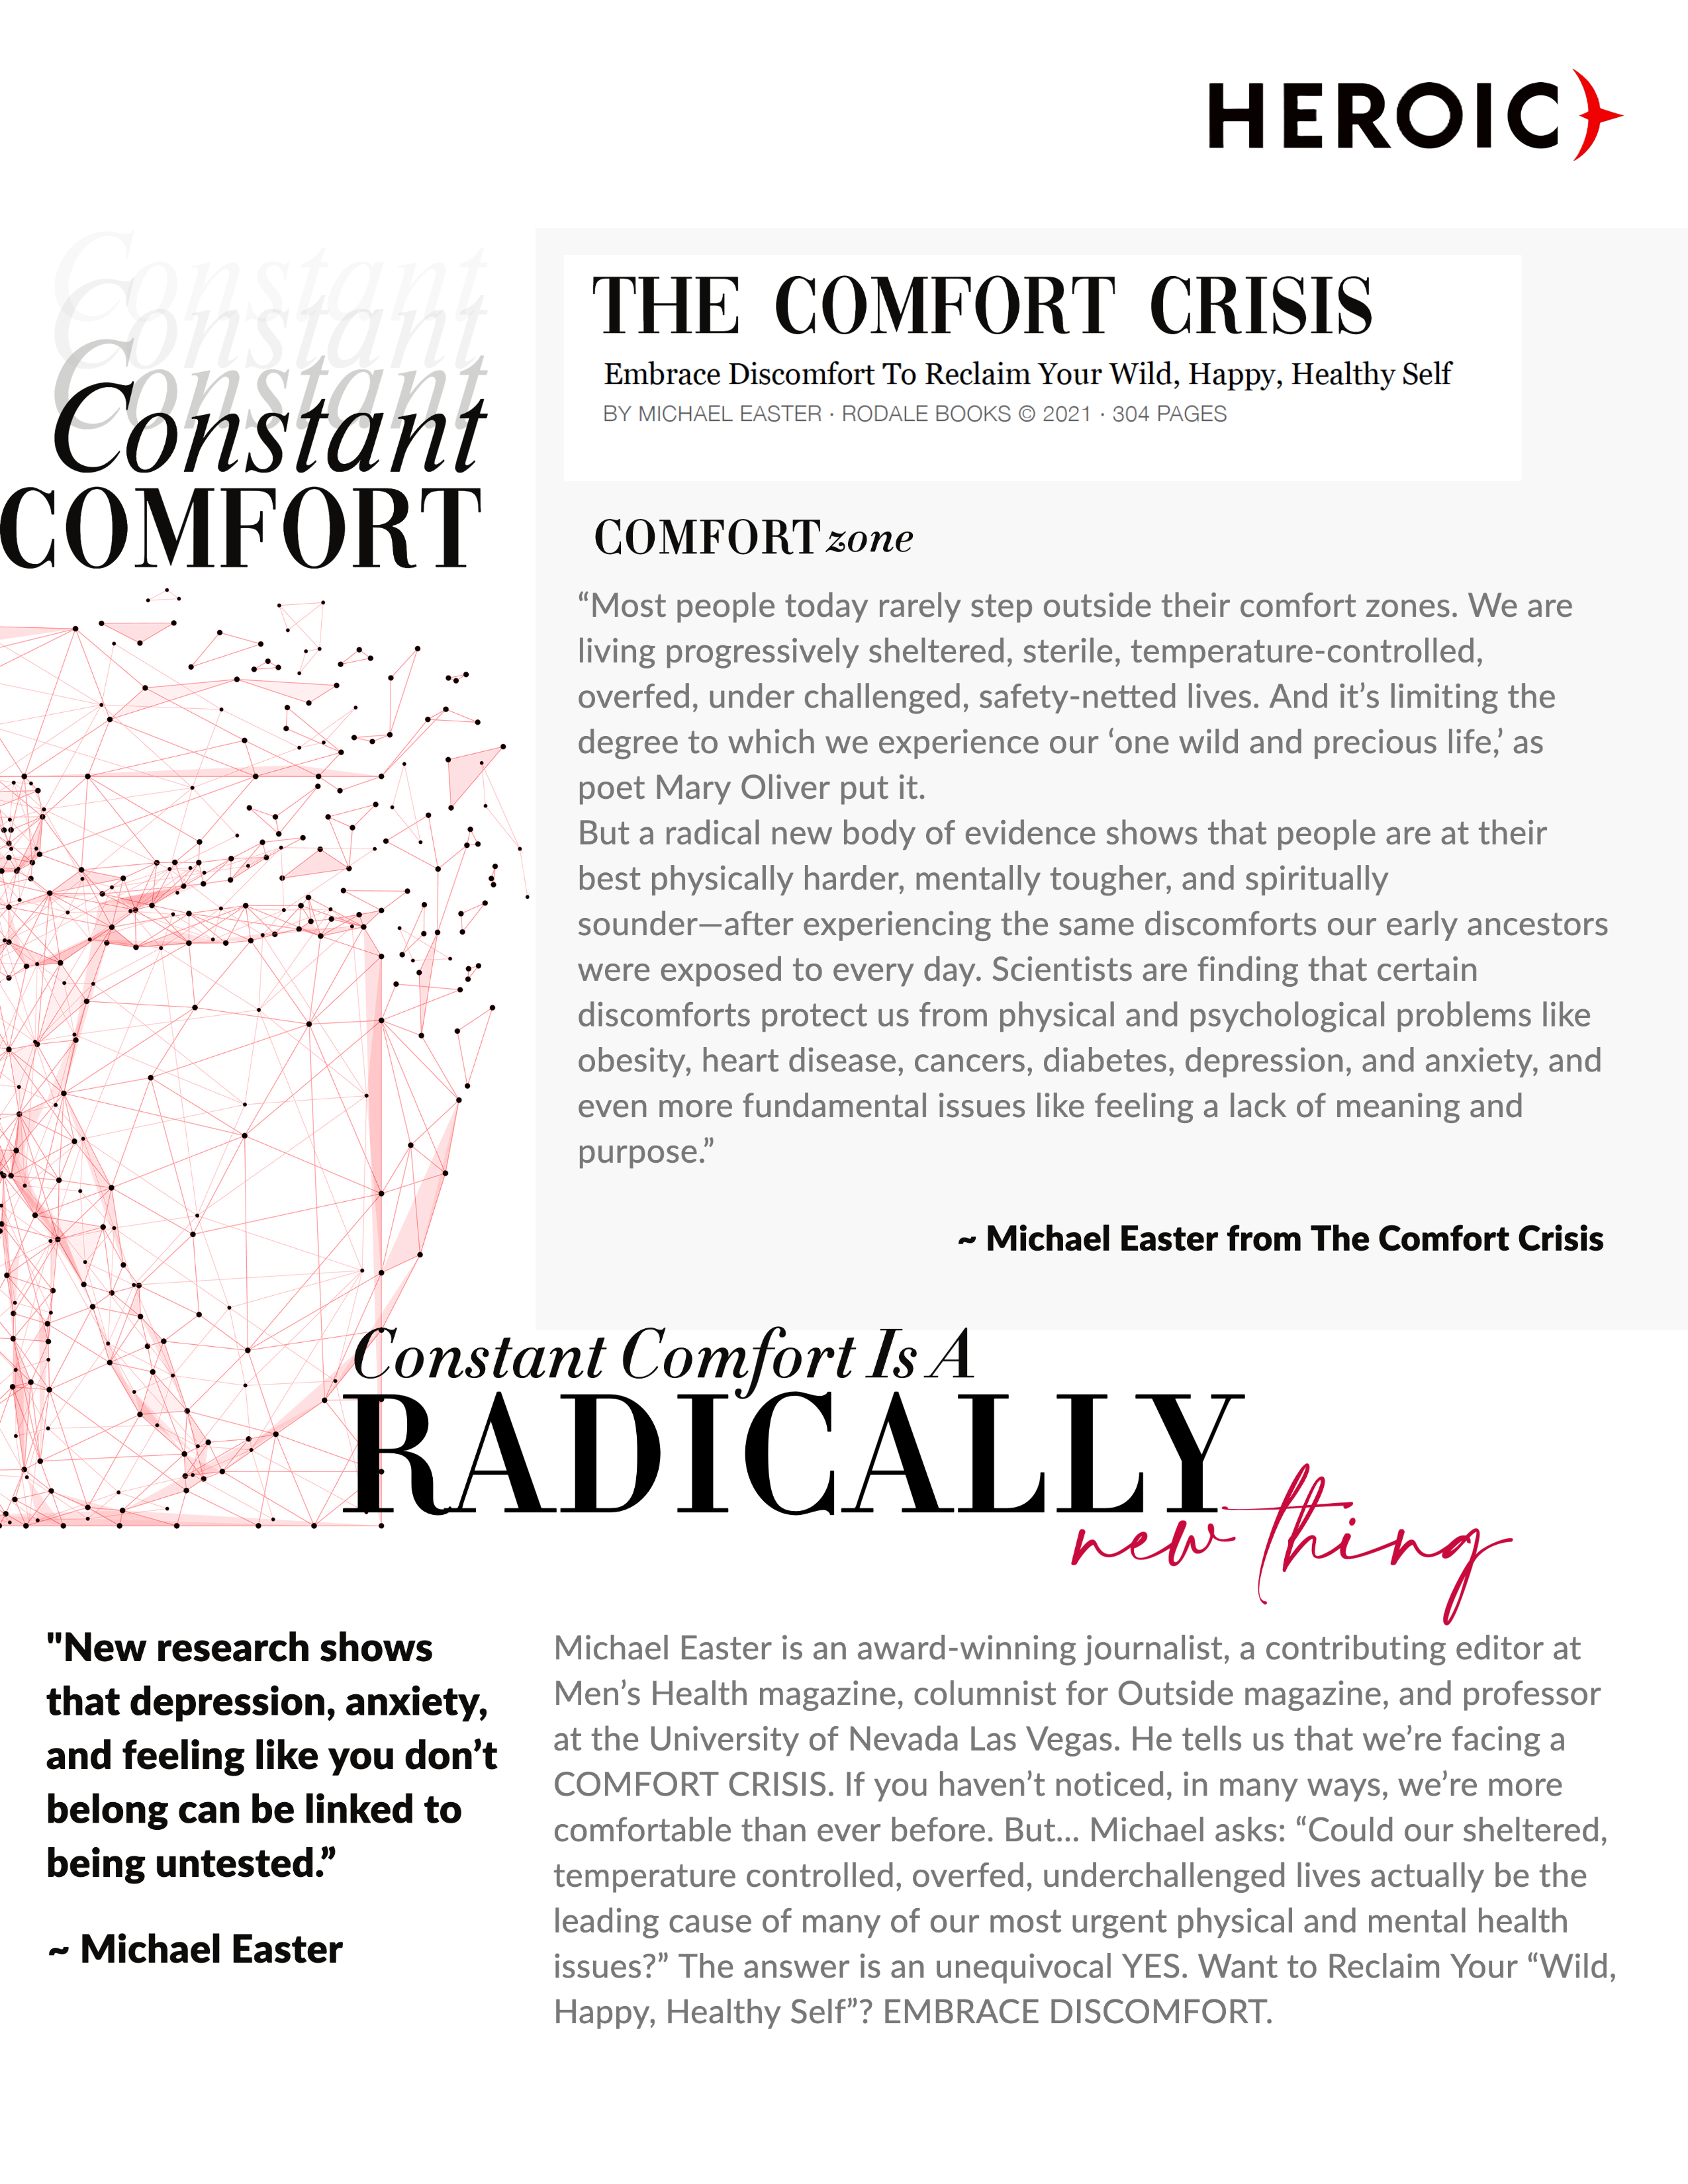 Comfort Crisis - Resilience Code